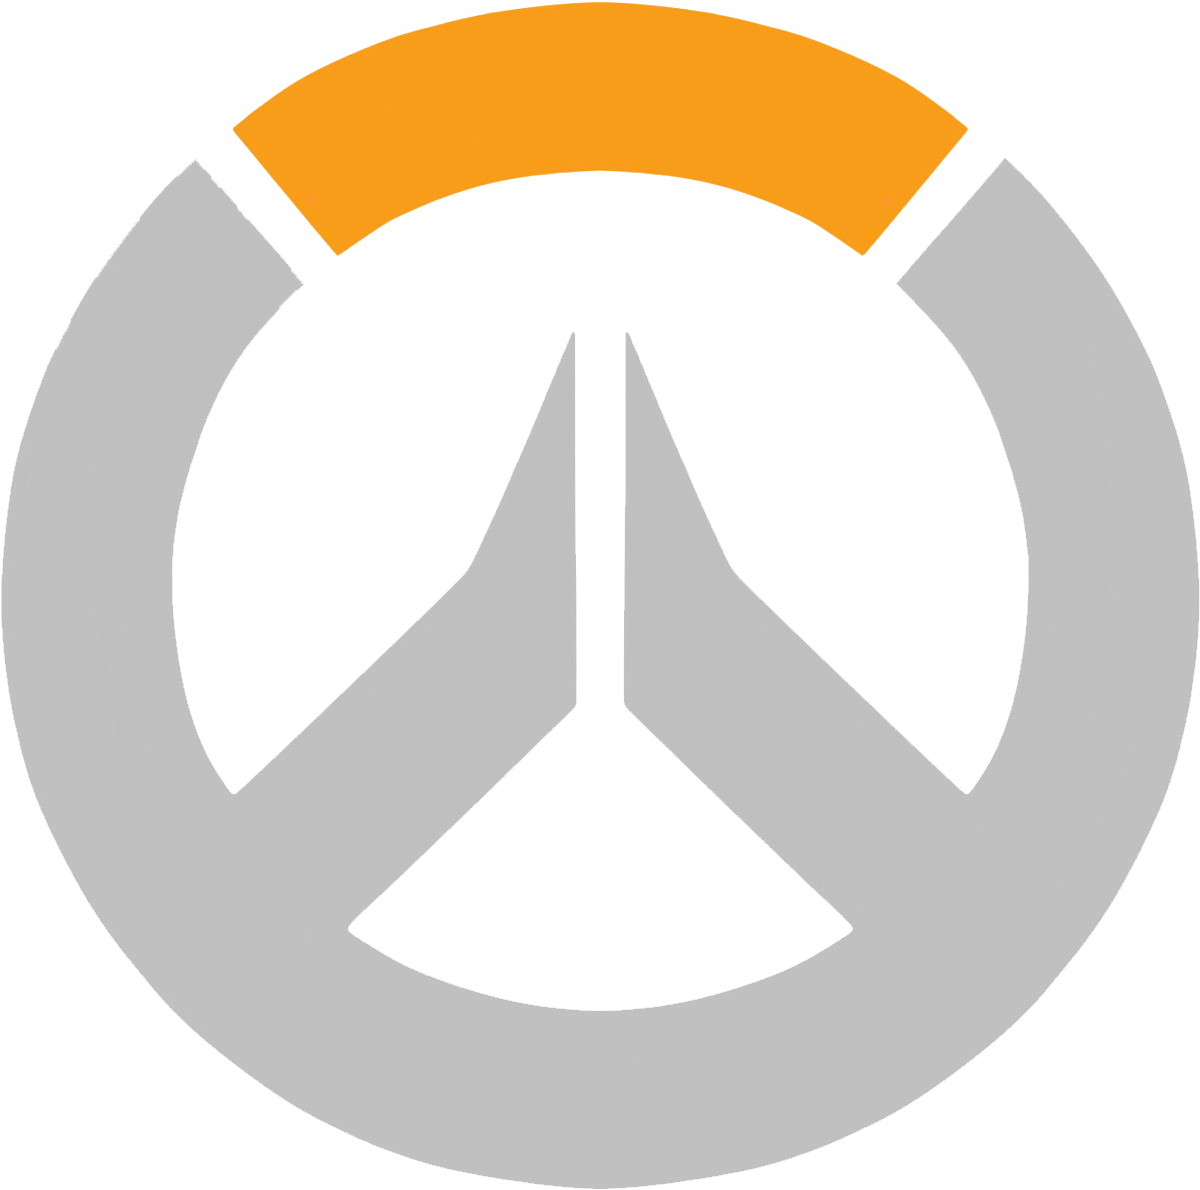 download-for-free-10-png-overwatch-icon-transparent-top-images-at-overwatch-icon-png-1200_1190.png - 104.96 kB